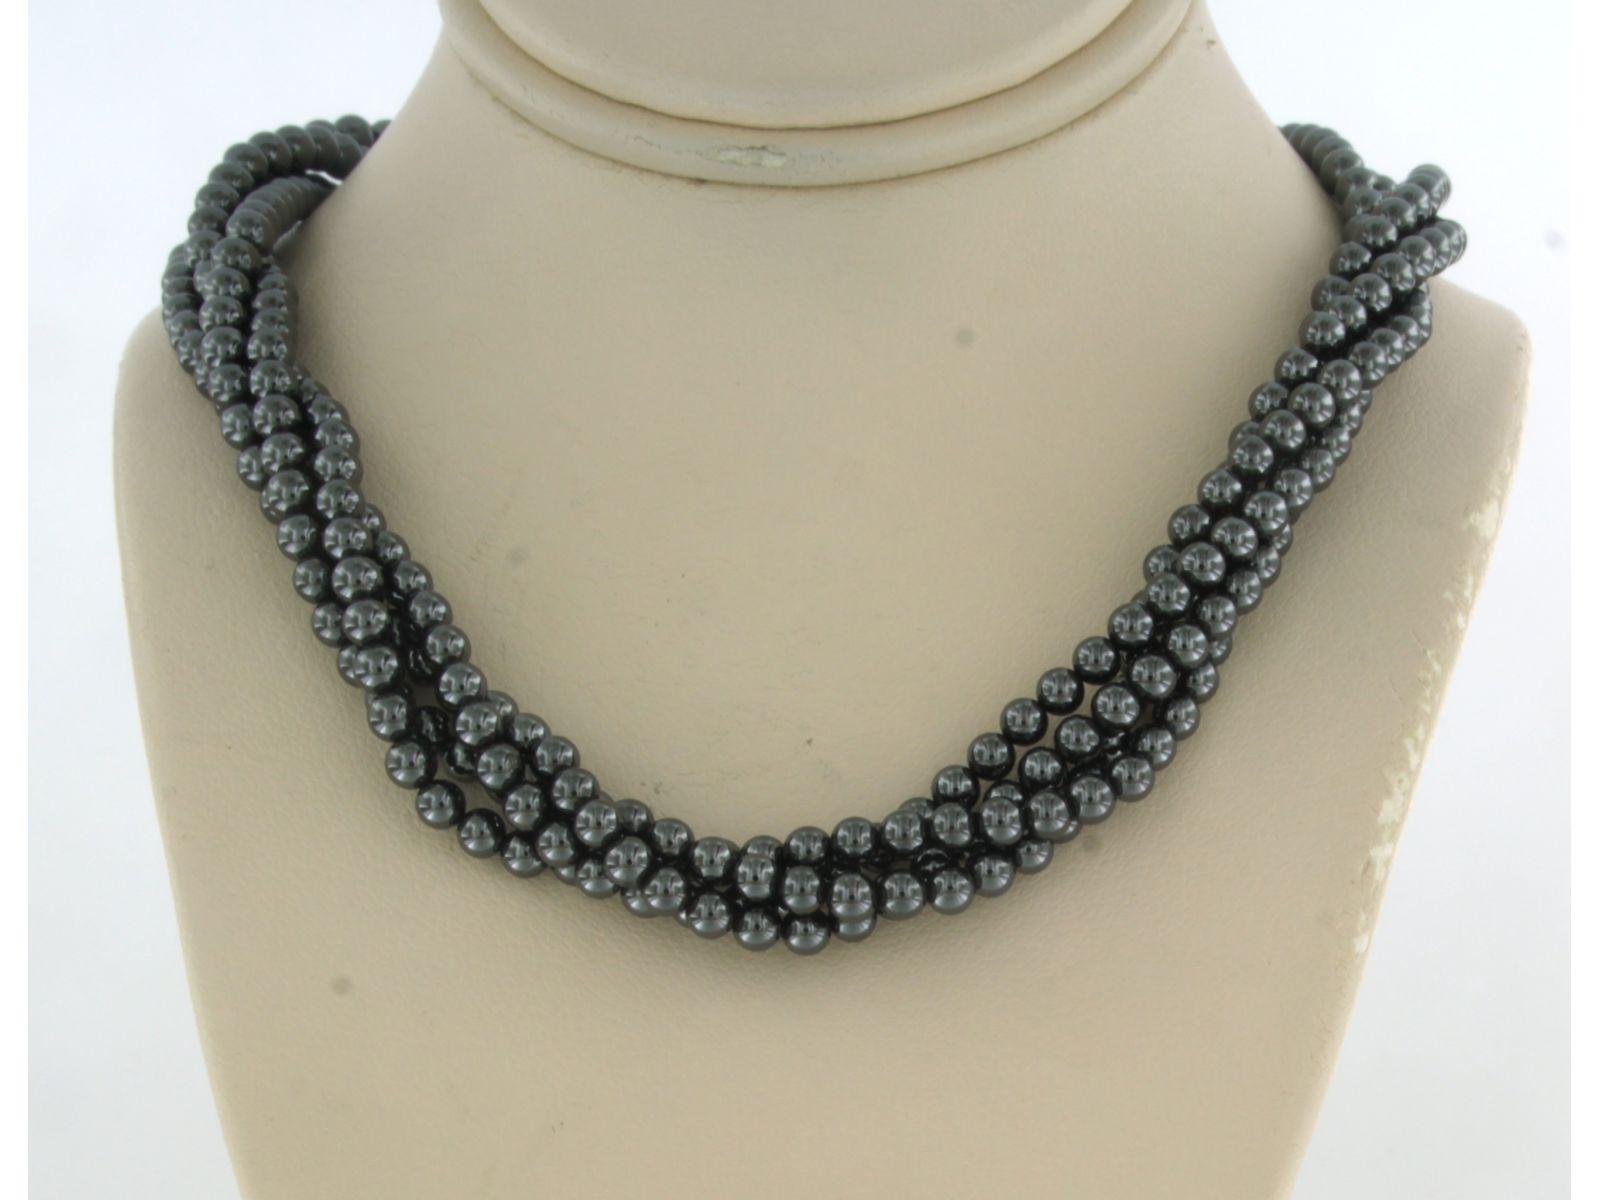 18k yellow gold clasp on a hematite bead necklace - 40 cm long

detailed description:

A hematite bead necklace with 18k yellow gold clasp

The four rows are rotated. Length is 40 cm, width is approximately 0.8 cm.

The diameter of the hematite